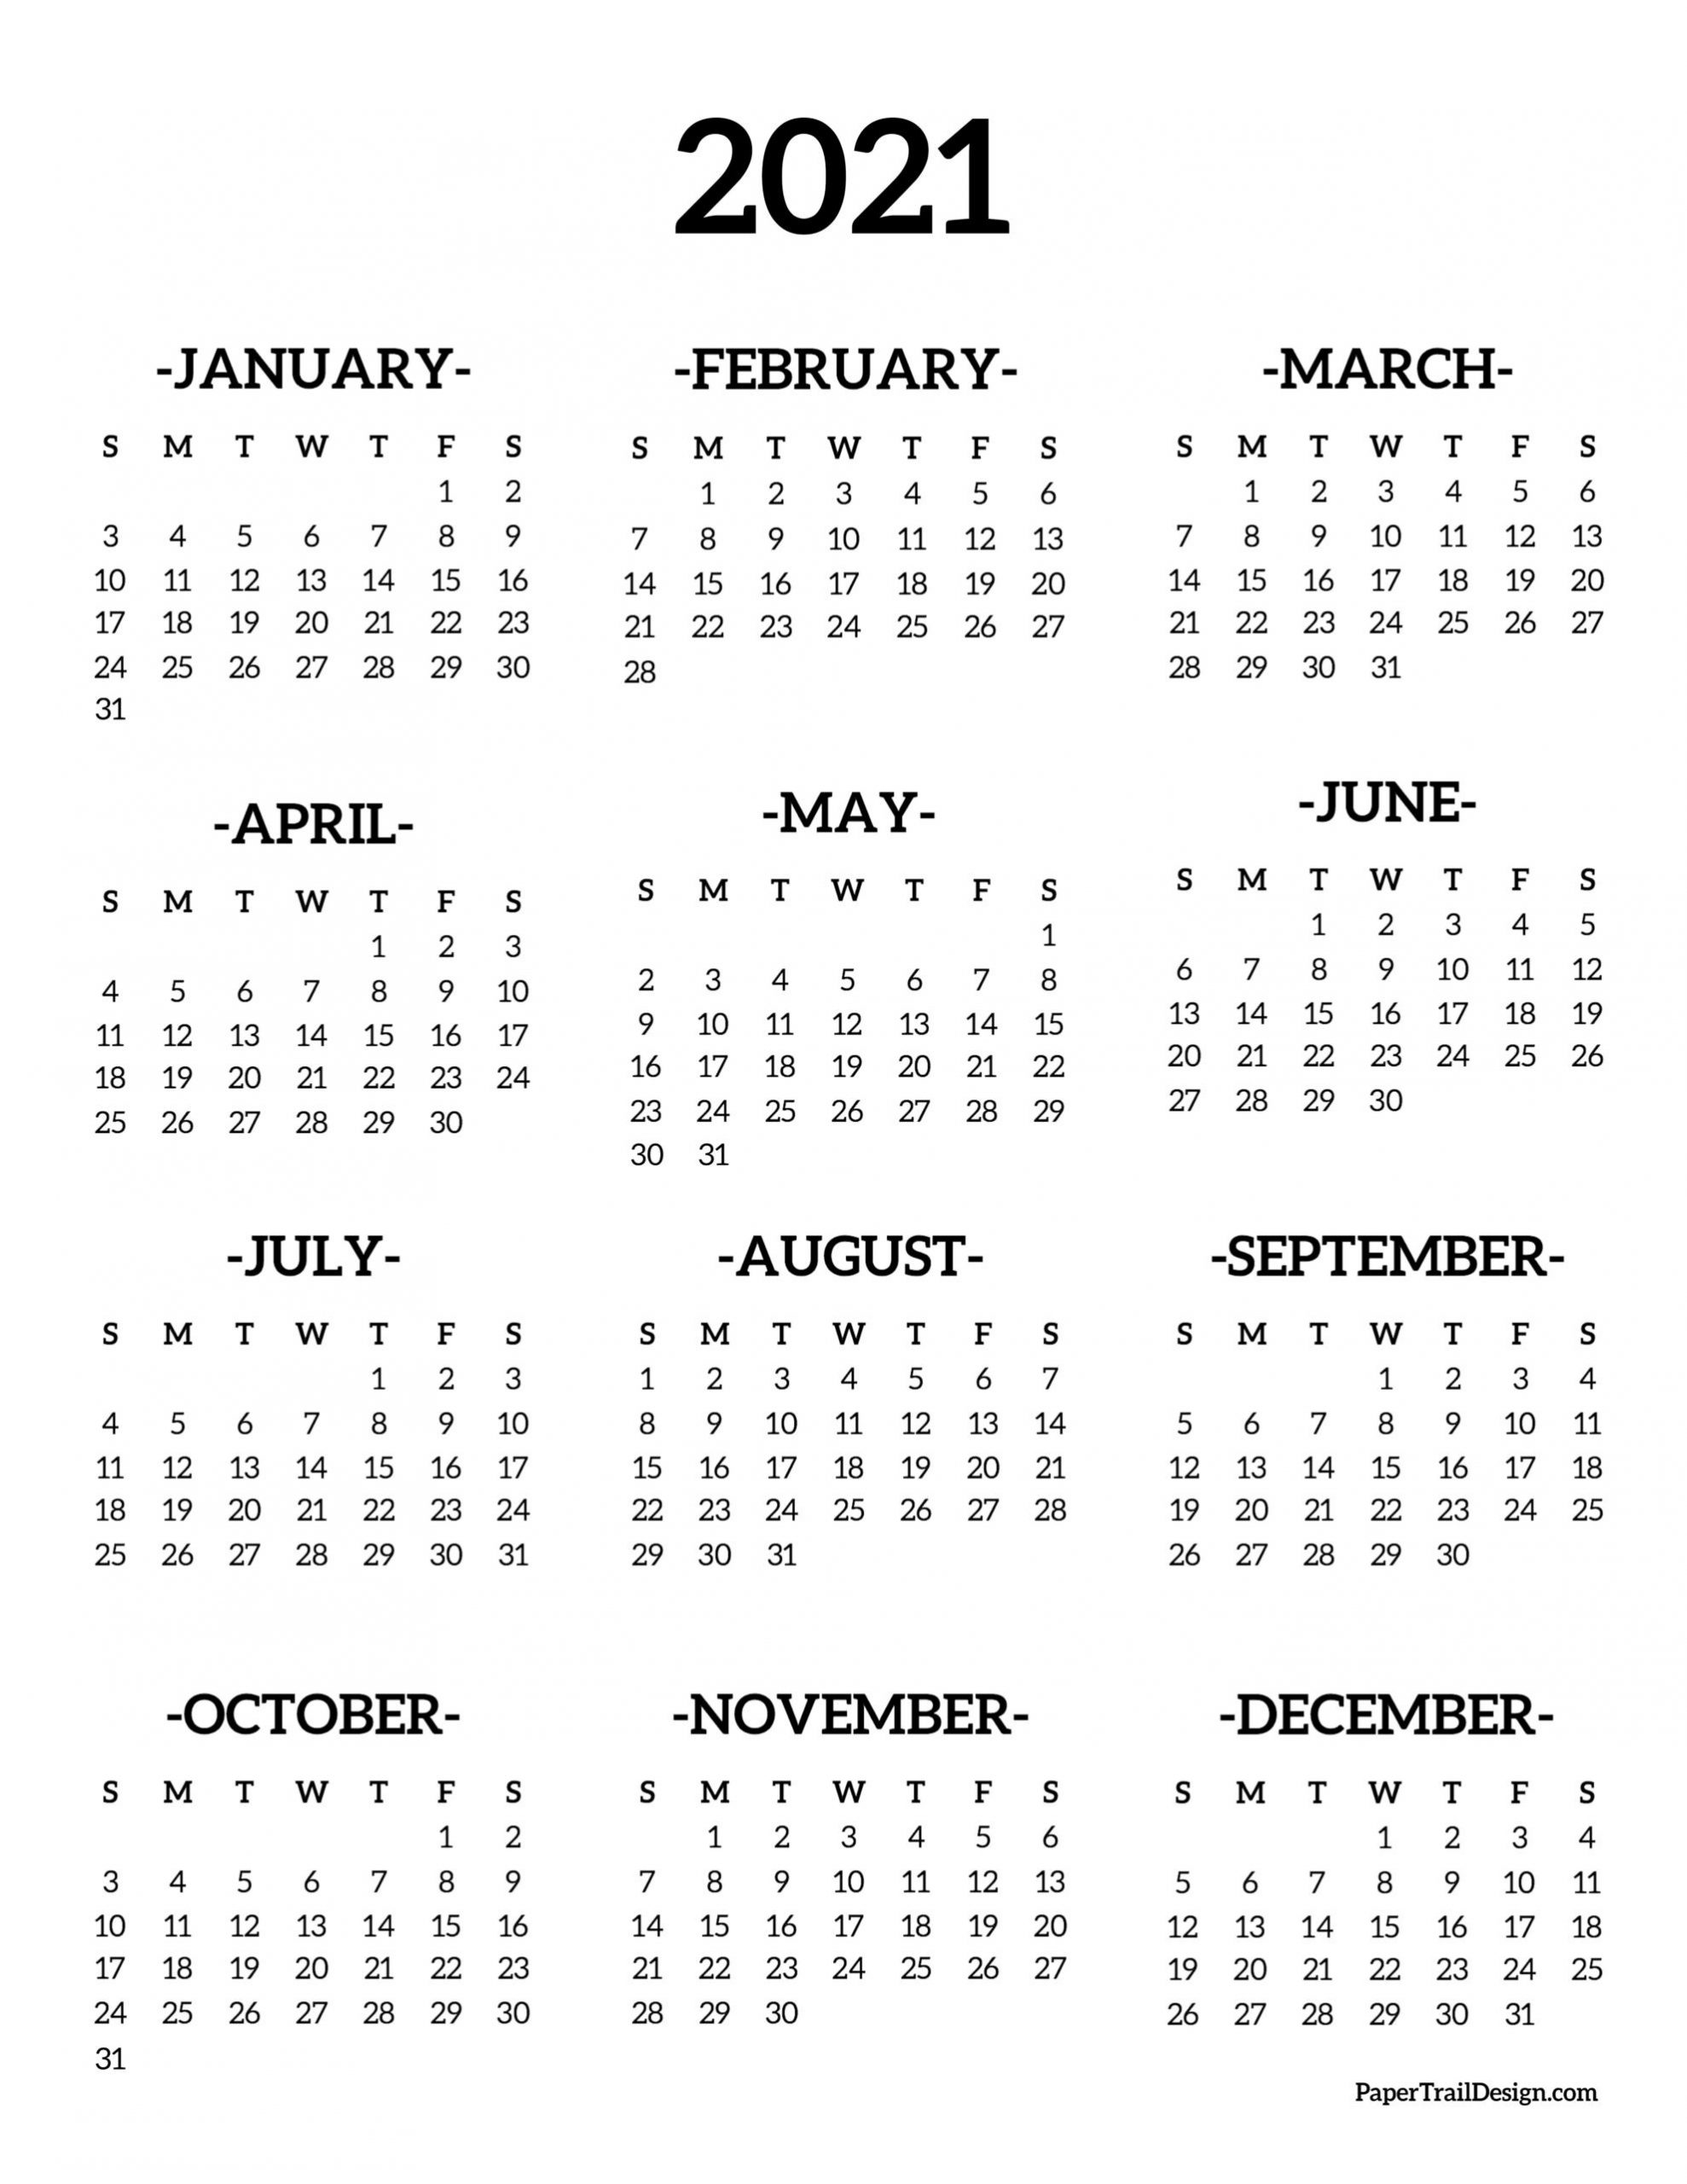 Calendar 2021 Printable One Page | Paper Trail Design-Blank Yearly Calendar 2021